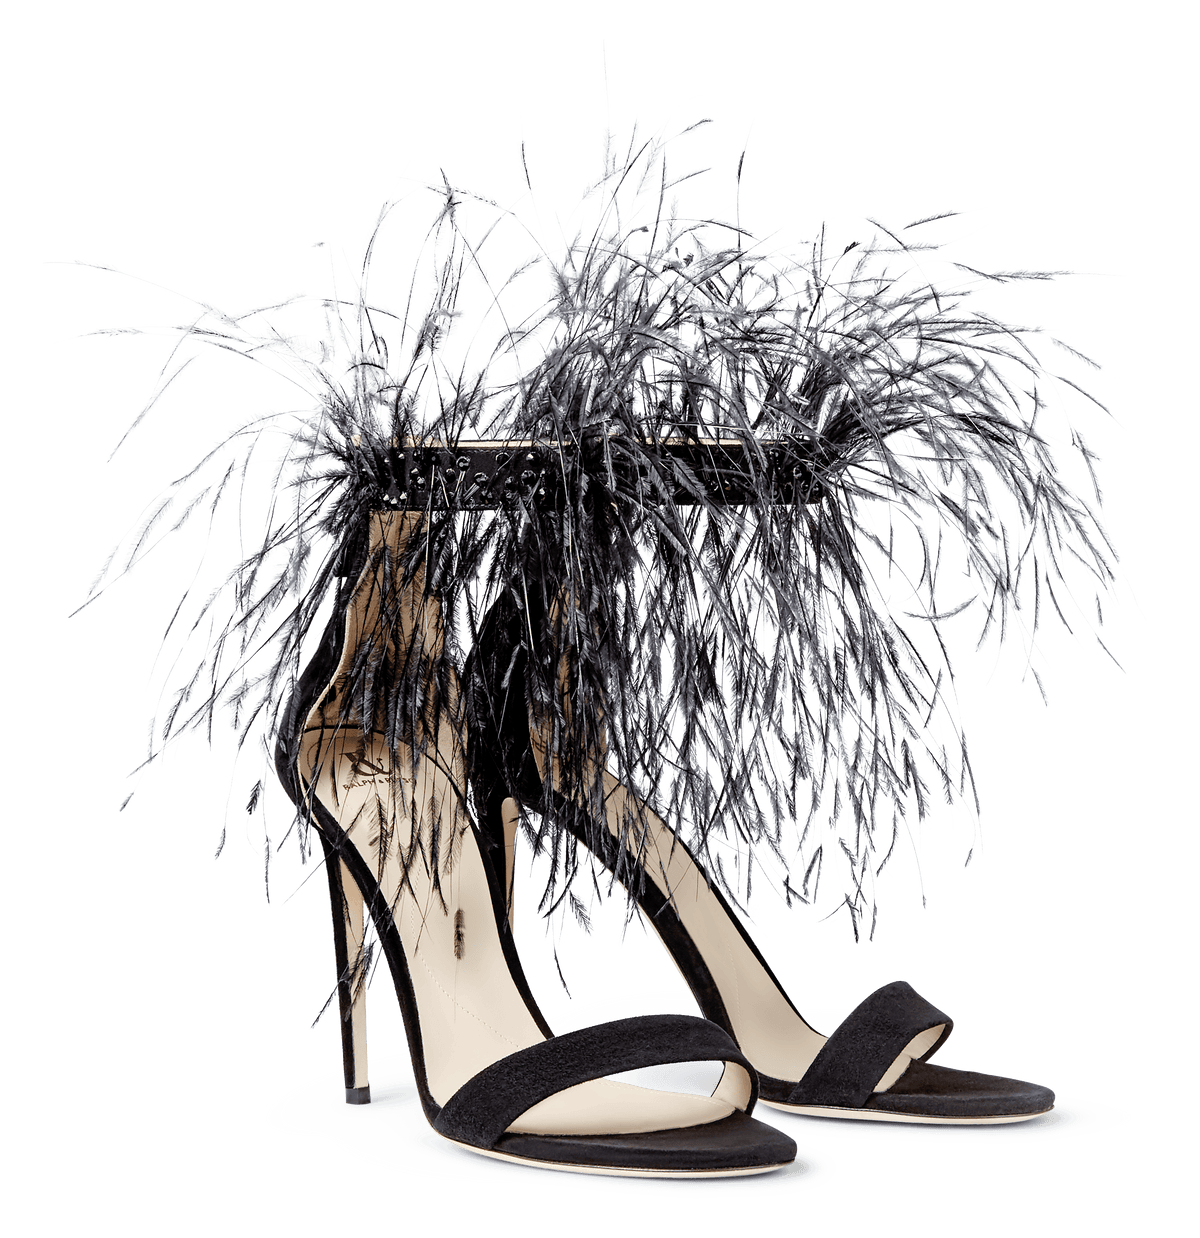 Black Suede Strap Sandals with Feathers